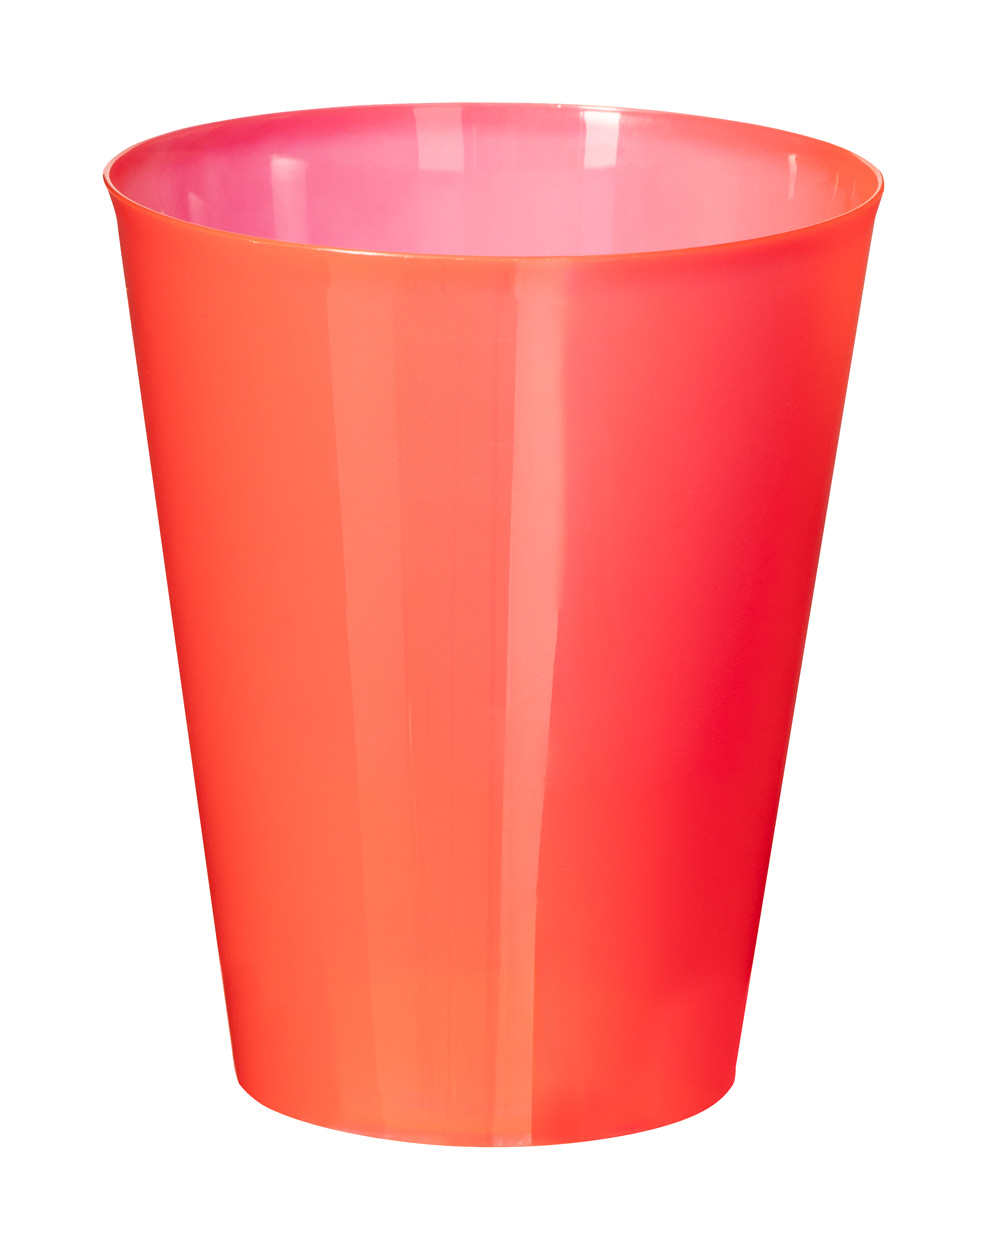 Colorbert reusable cup for events - Rot